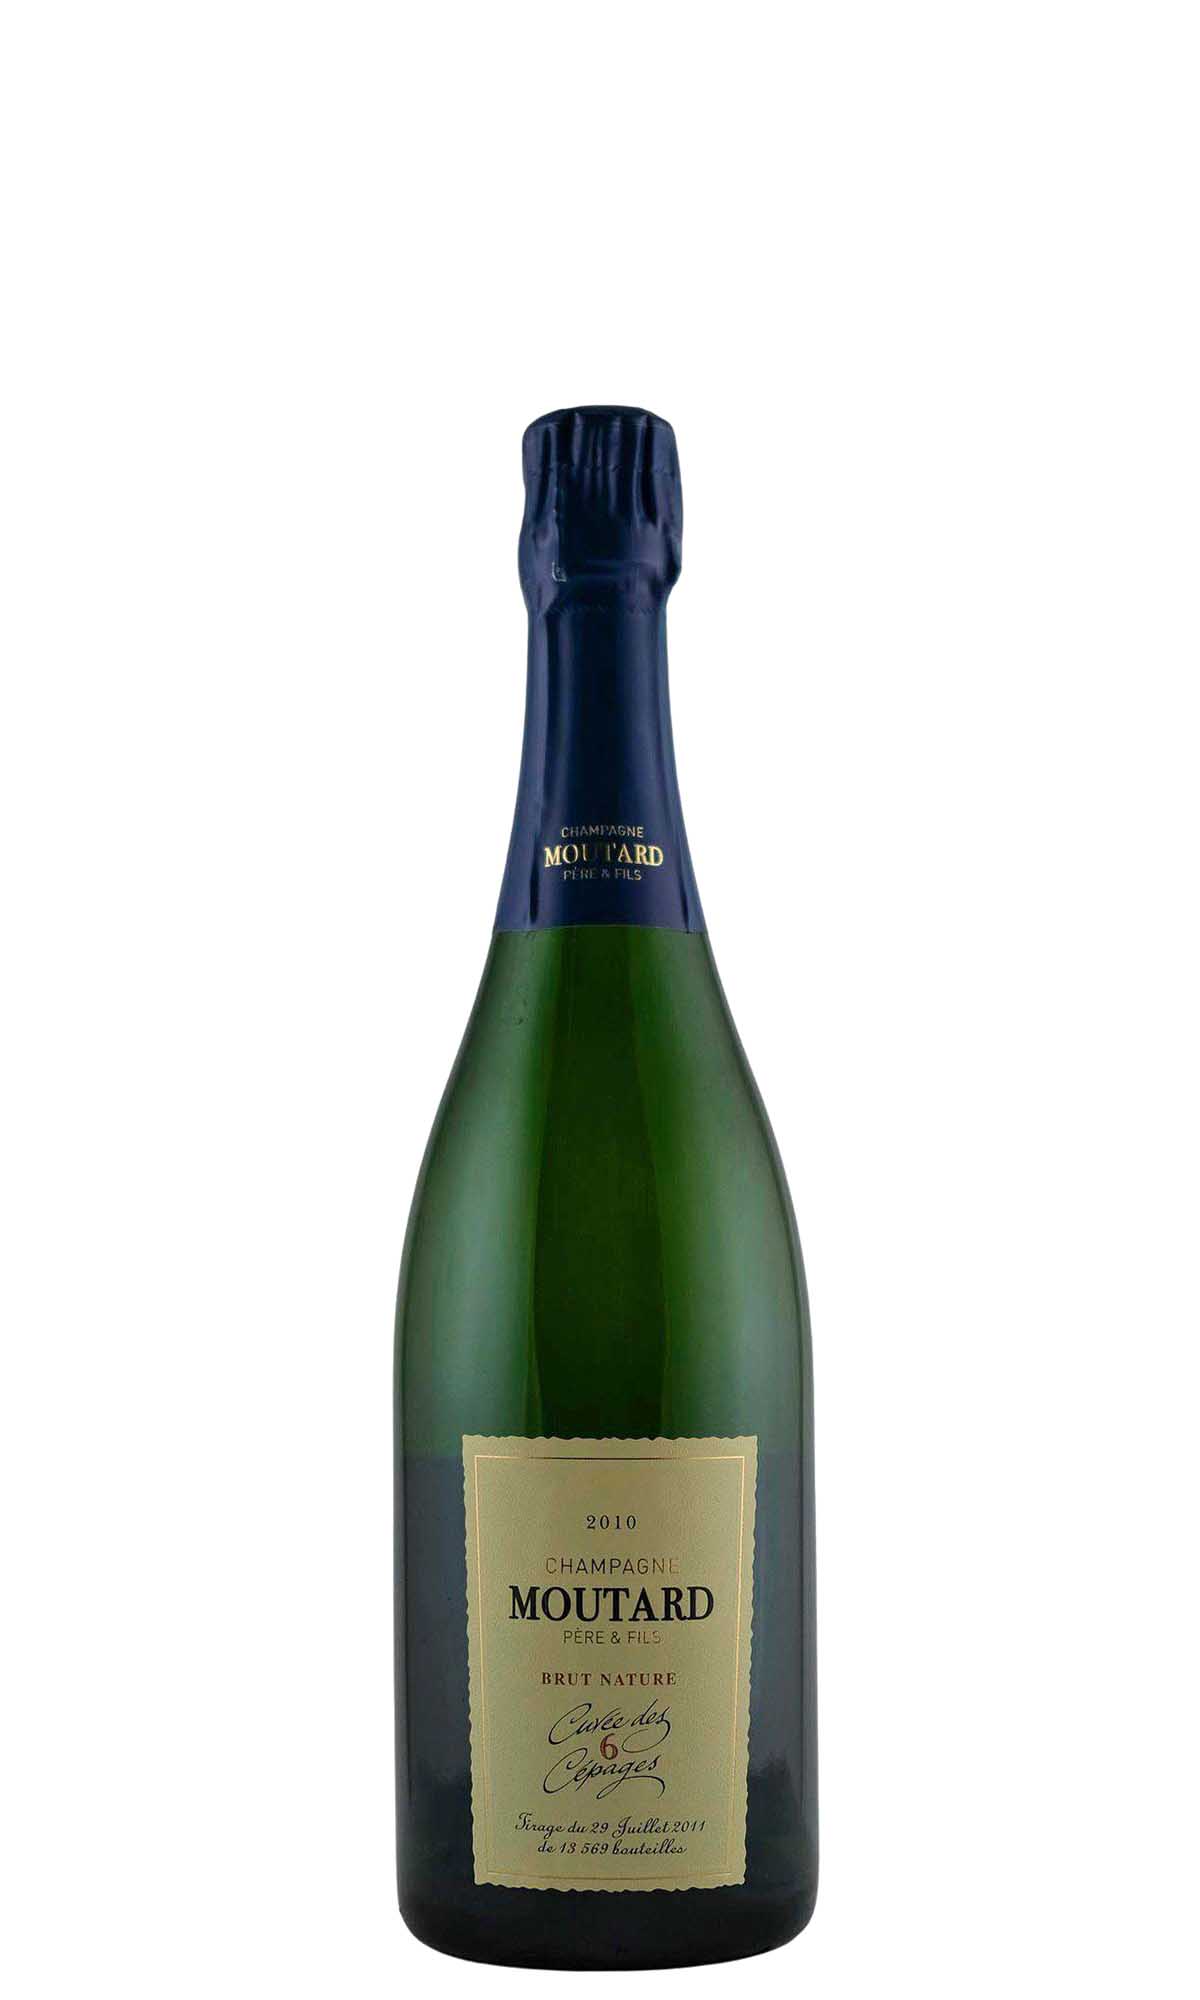 Moutard, Champagne Cuvee 6 Cepages Brut Nature, 2010